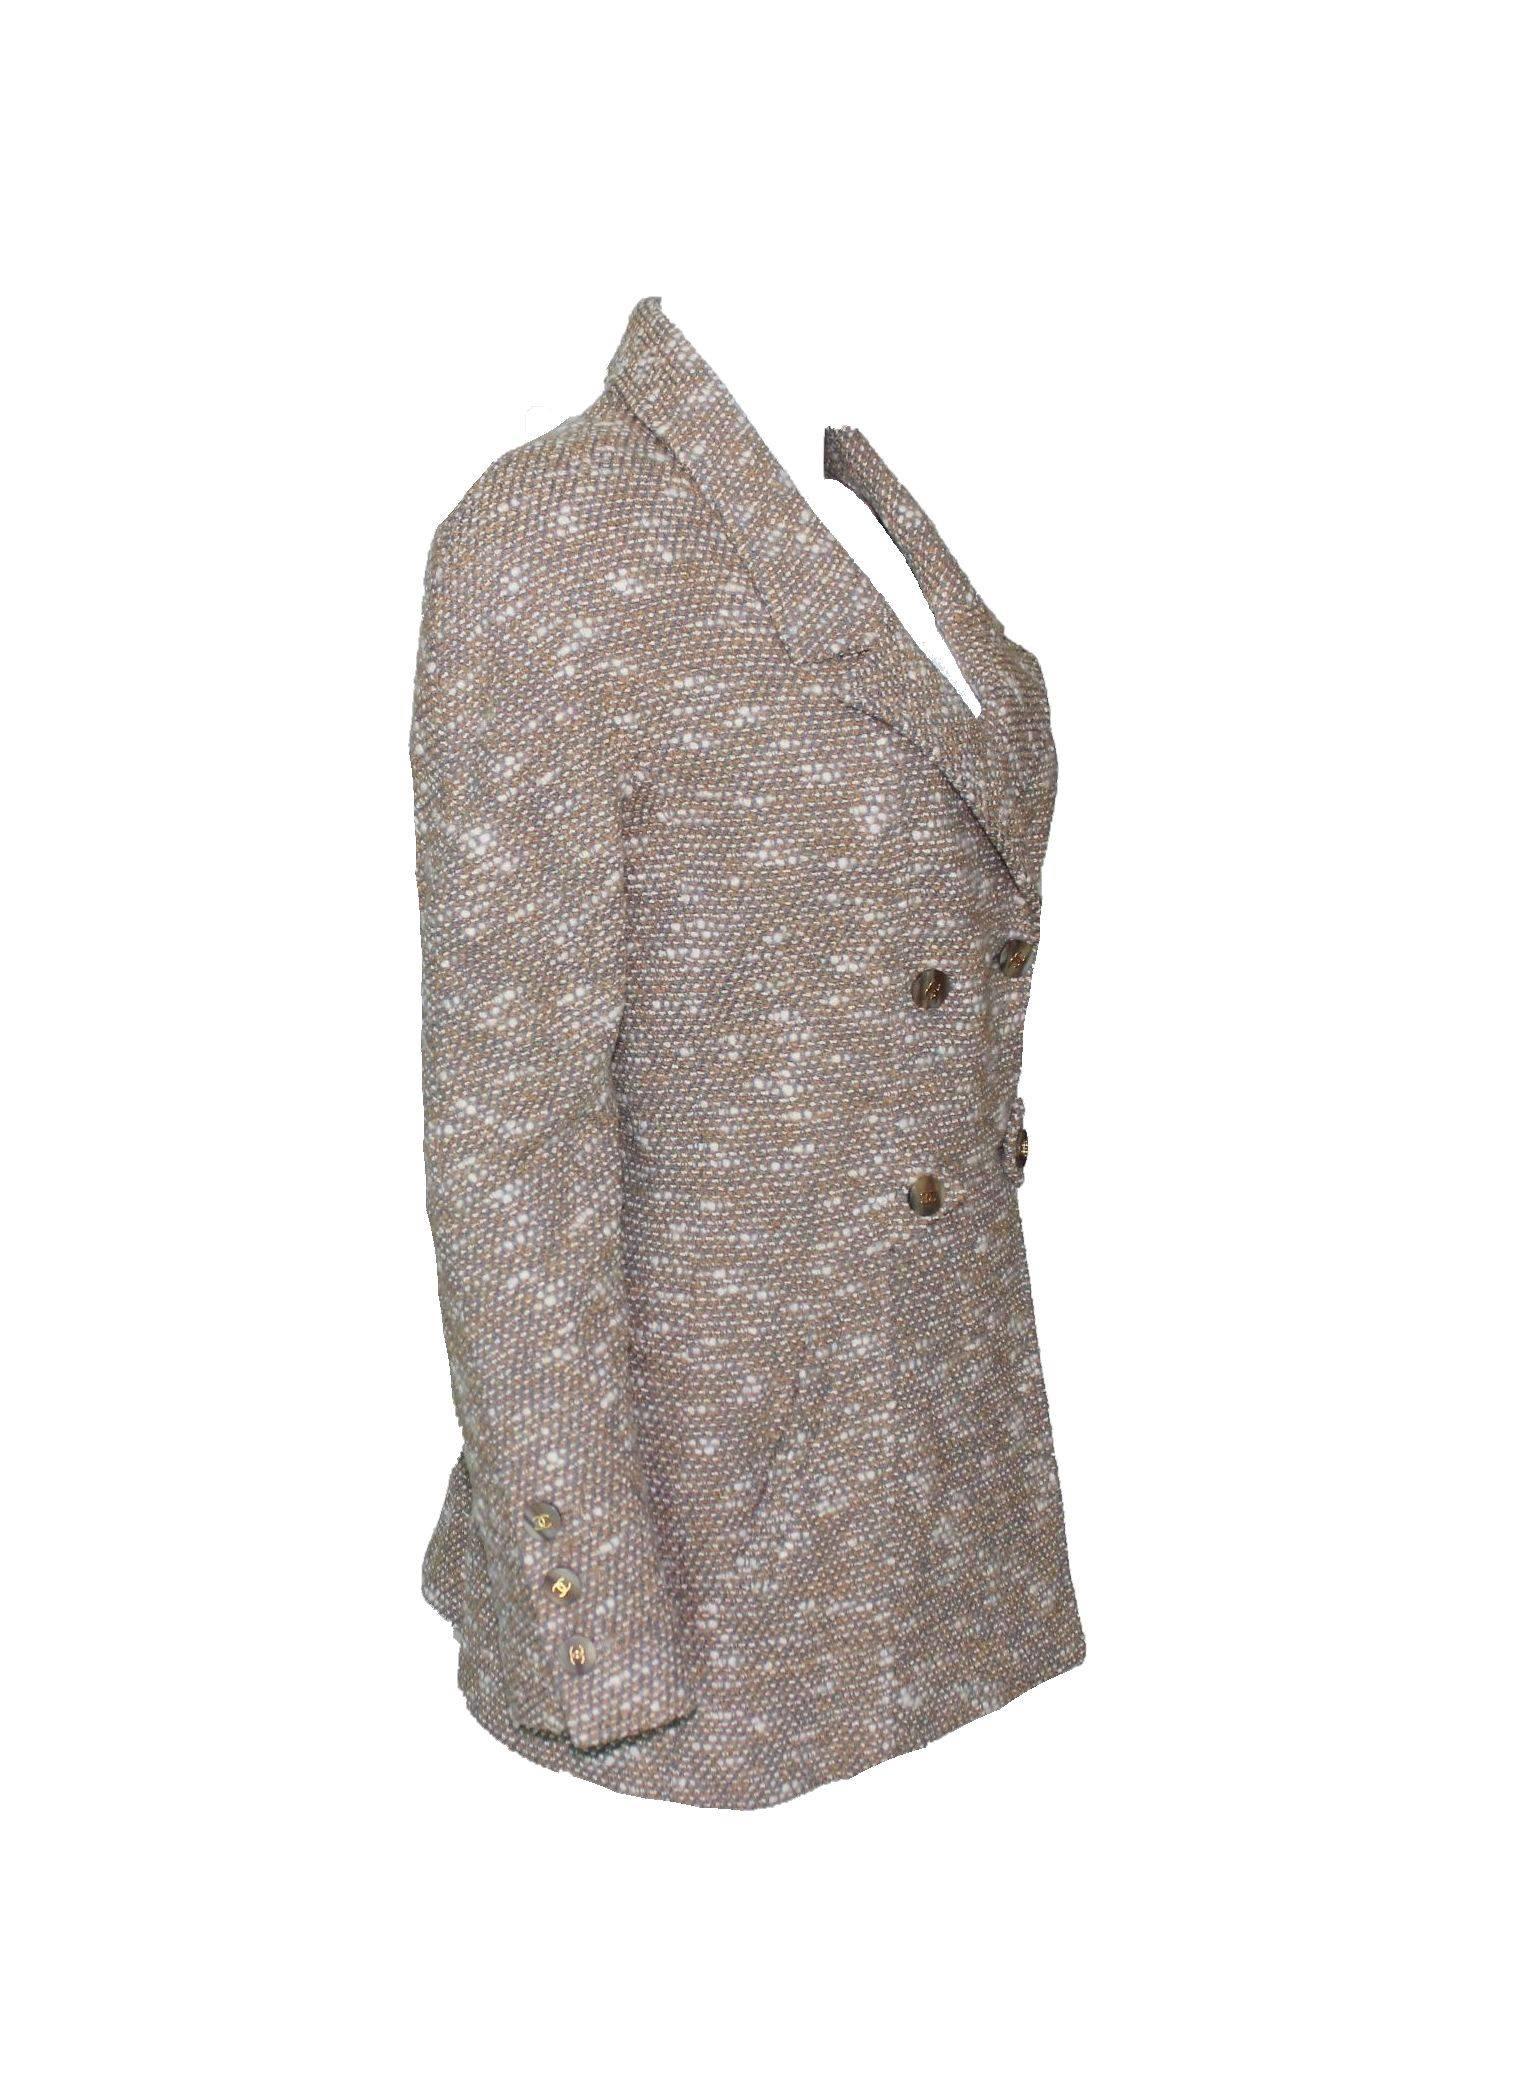 Beautiful CHANEL tweed coat
A true CHANEL signature item that will last you for many years
Stunning colors in light brown, cream and blue, perfect with jeans!
A truly versatile piece, can be worn as blazer, jacket or short coat
Two front